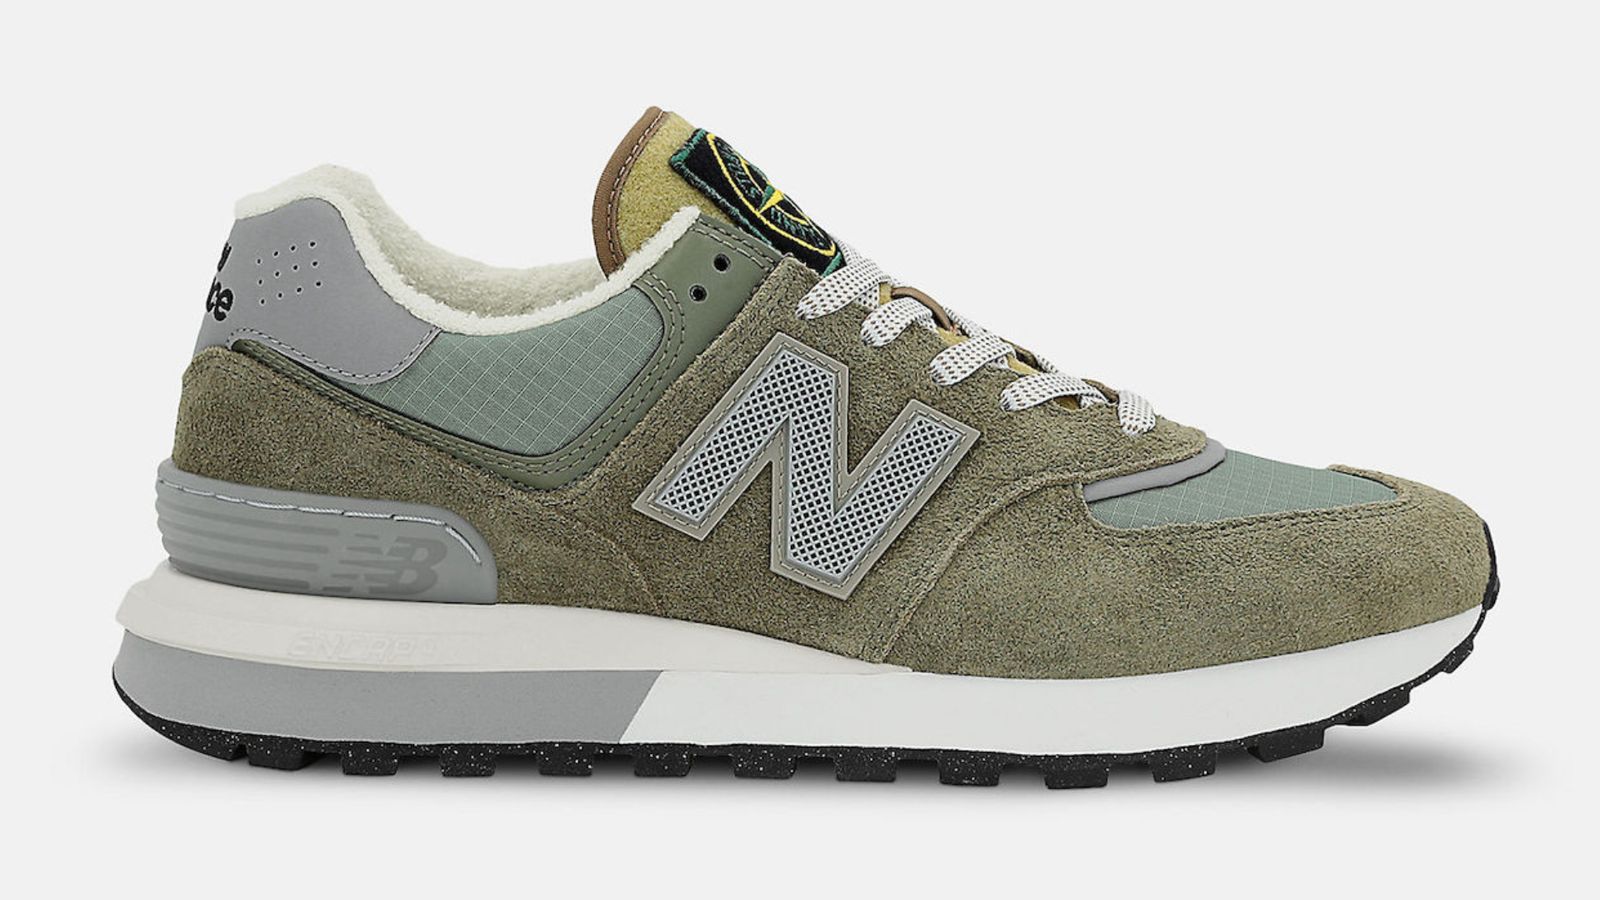 Stone Island x New Balance 574 Legacy "Steel Blue Green" shoes with a dark green hue constructed in a mix of ripstop and suede materials giving off a deconstructed archive inspired look